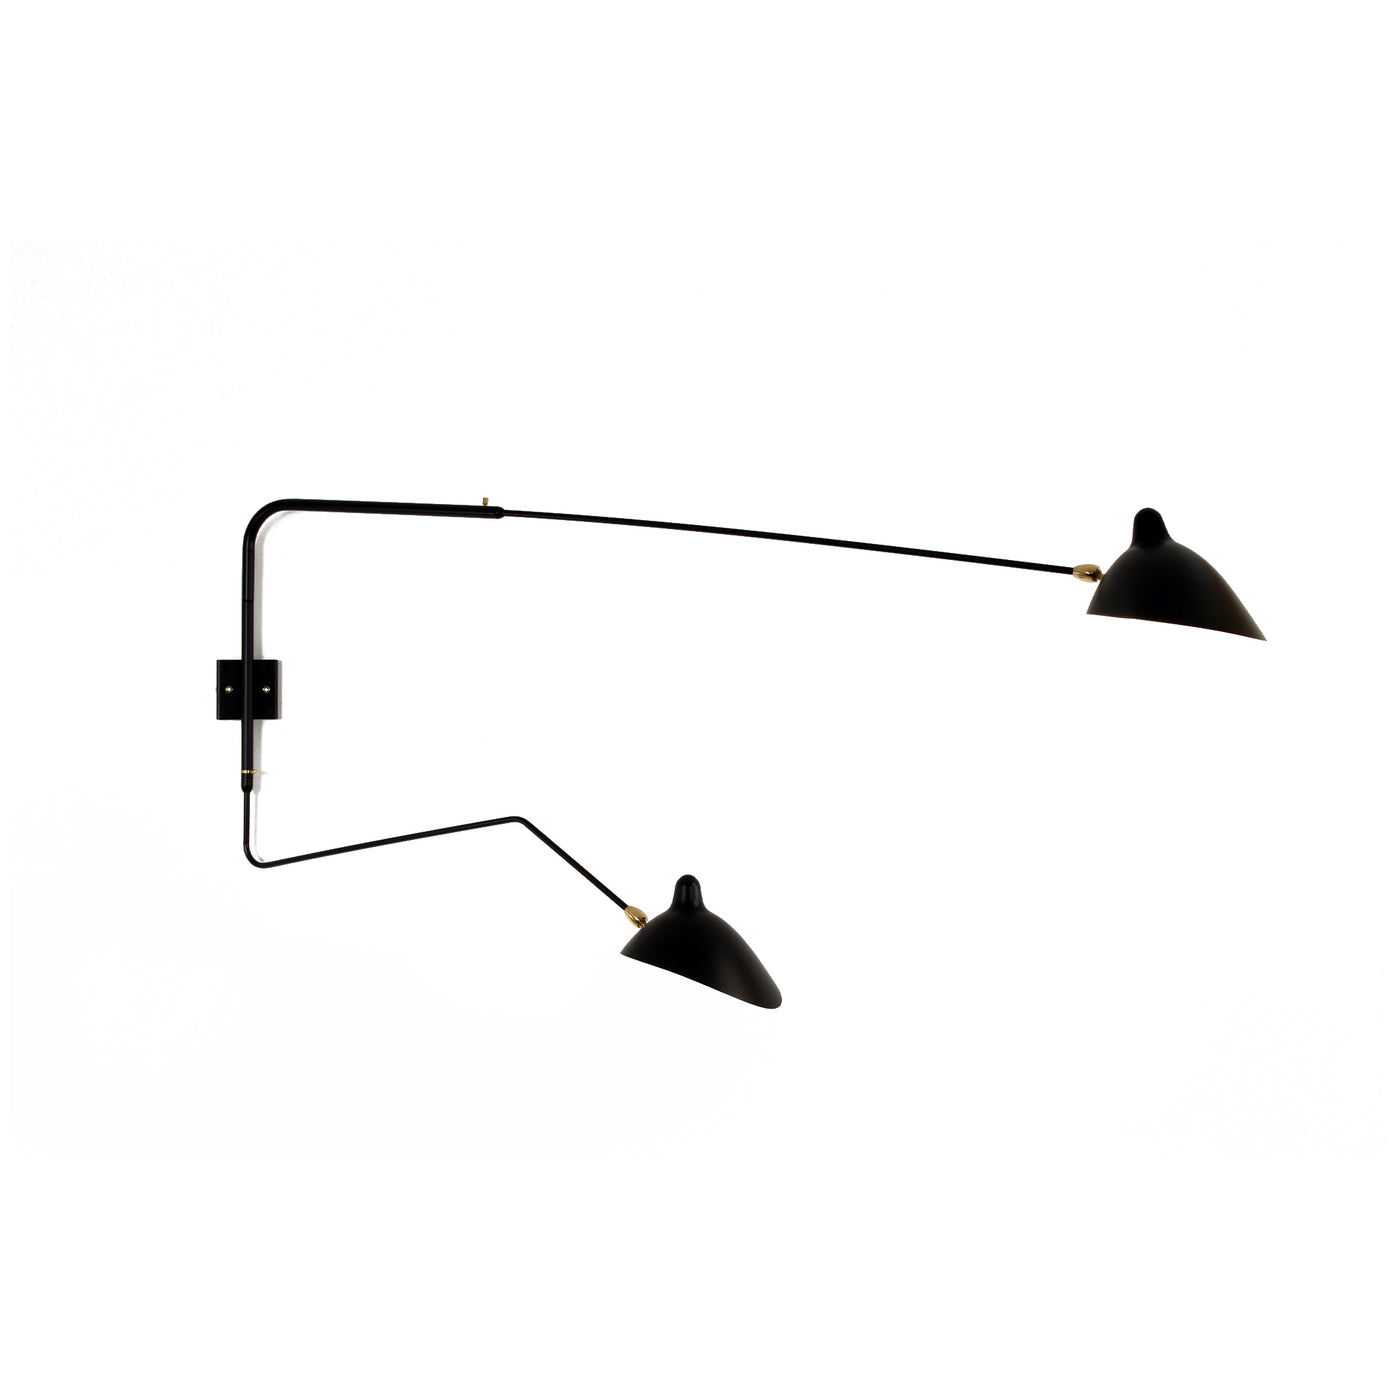 ONE ARM STRAIGHT ONE CURVED wall light (1954)